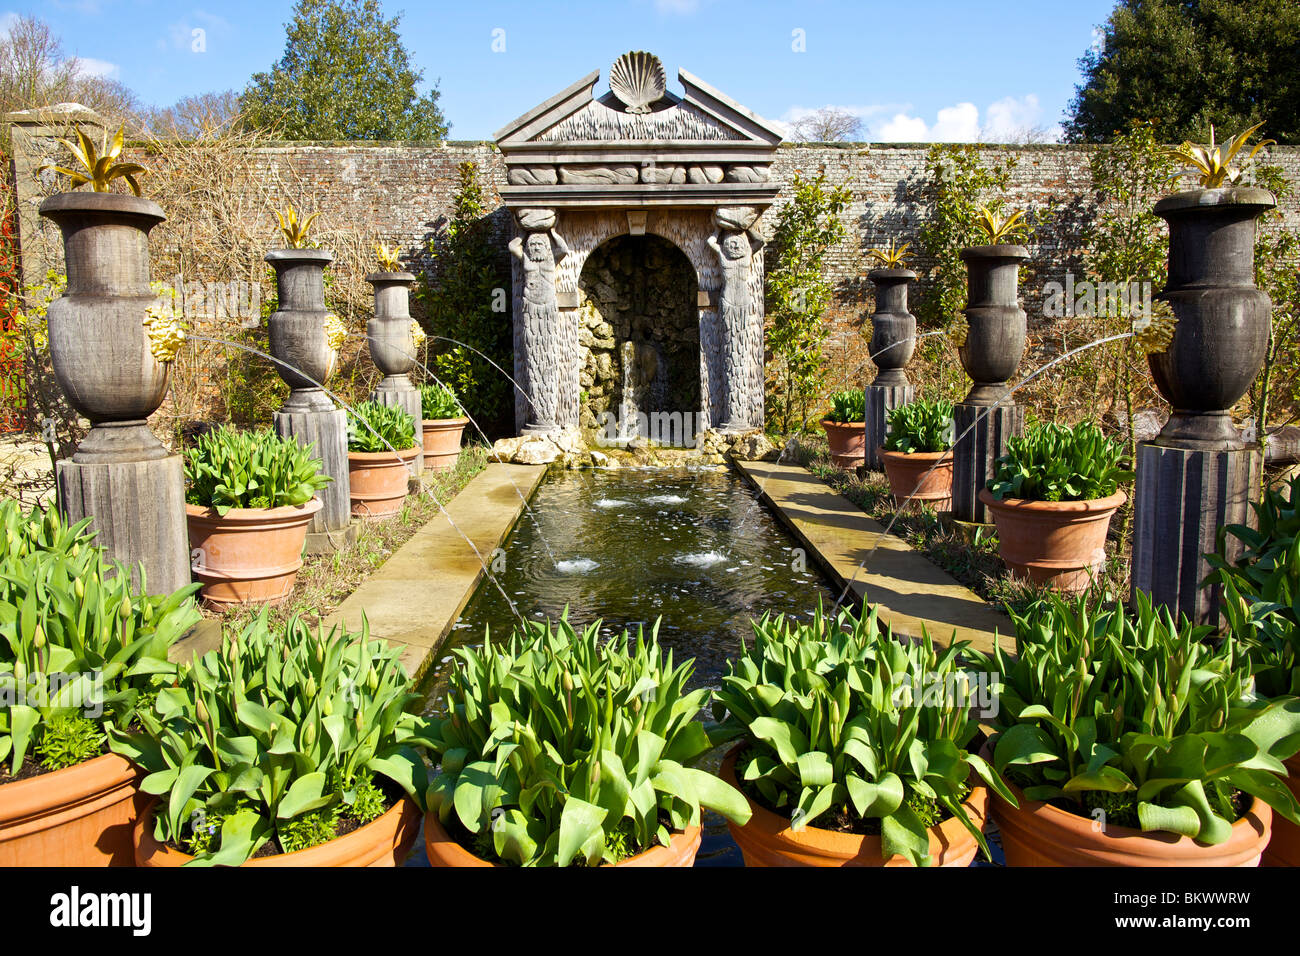 The Collector Earl's Garden at Arundel Castle in Arundel, West Sussex, England Stock Photo